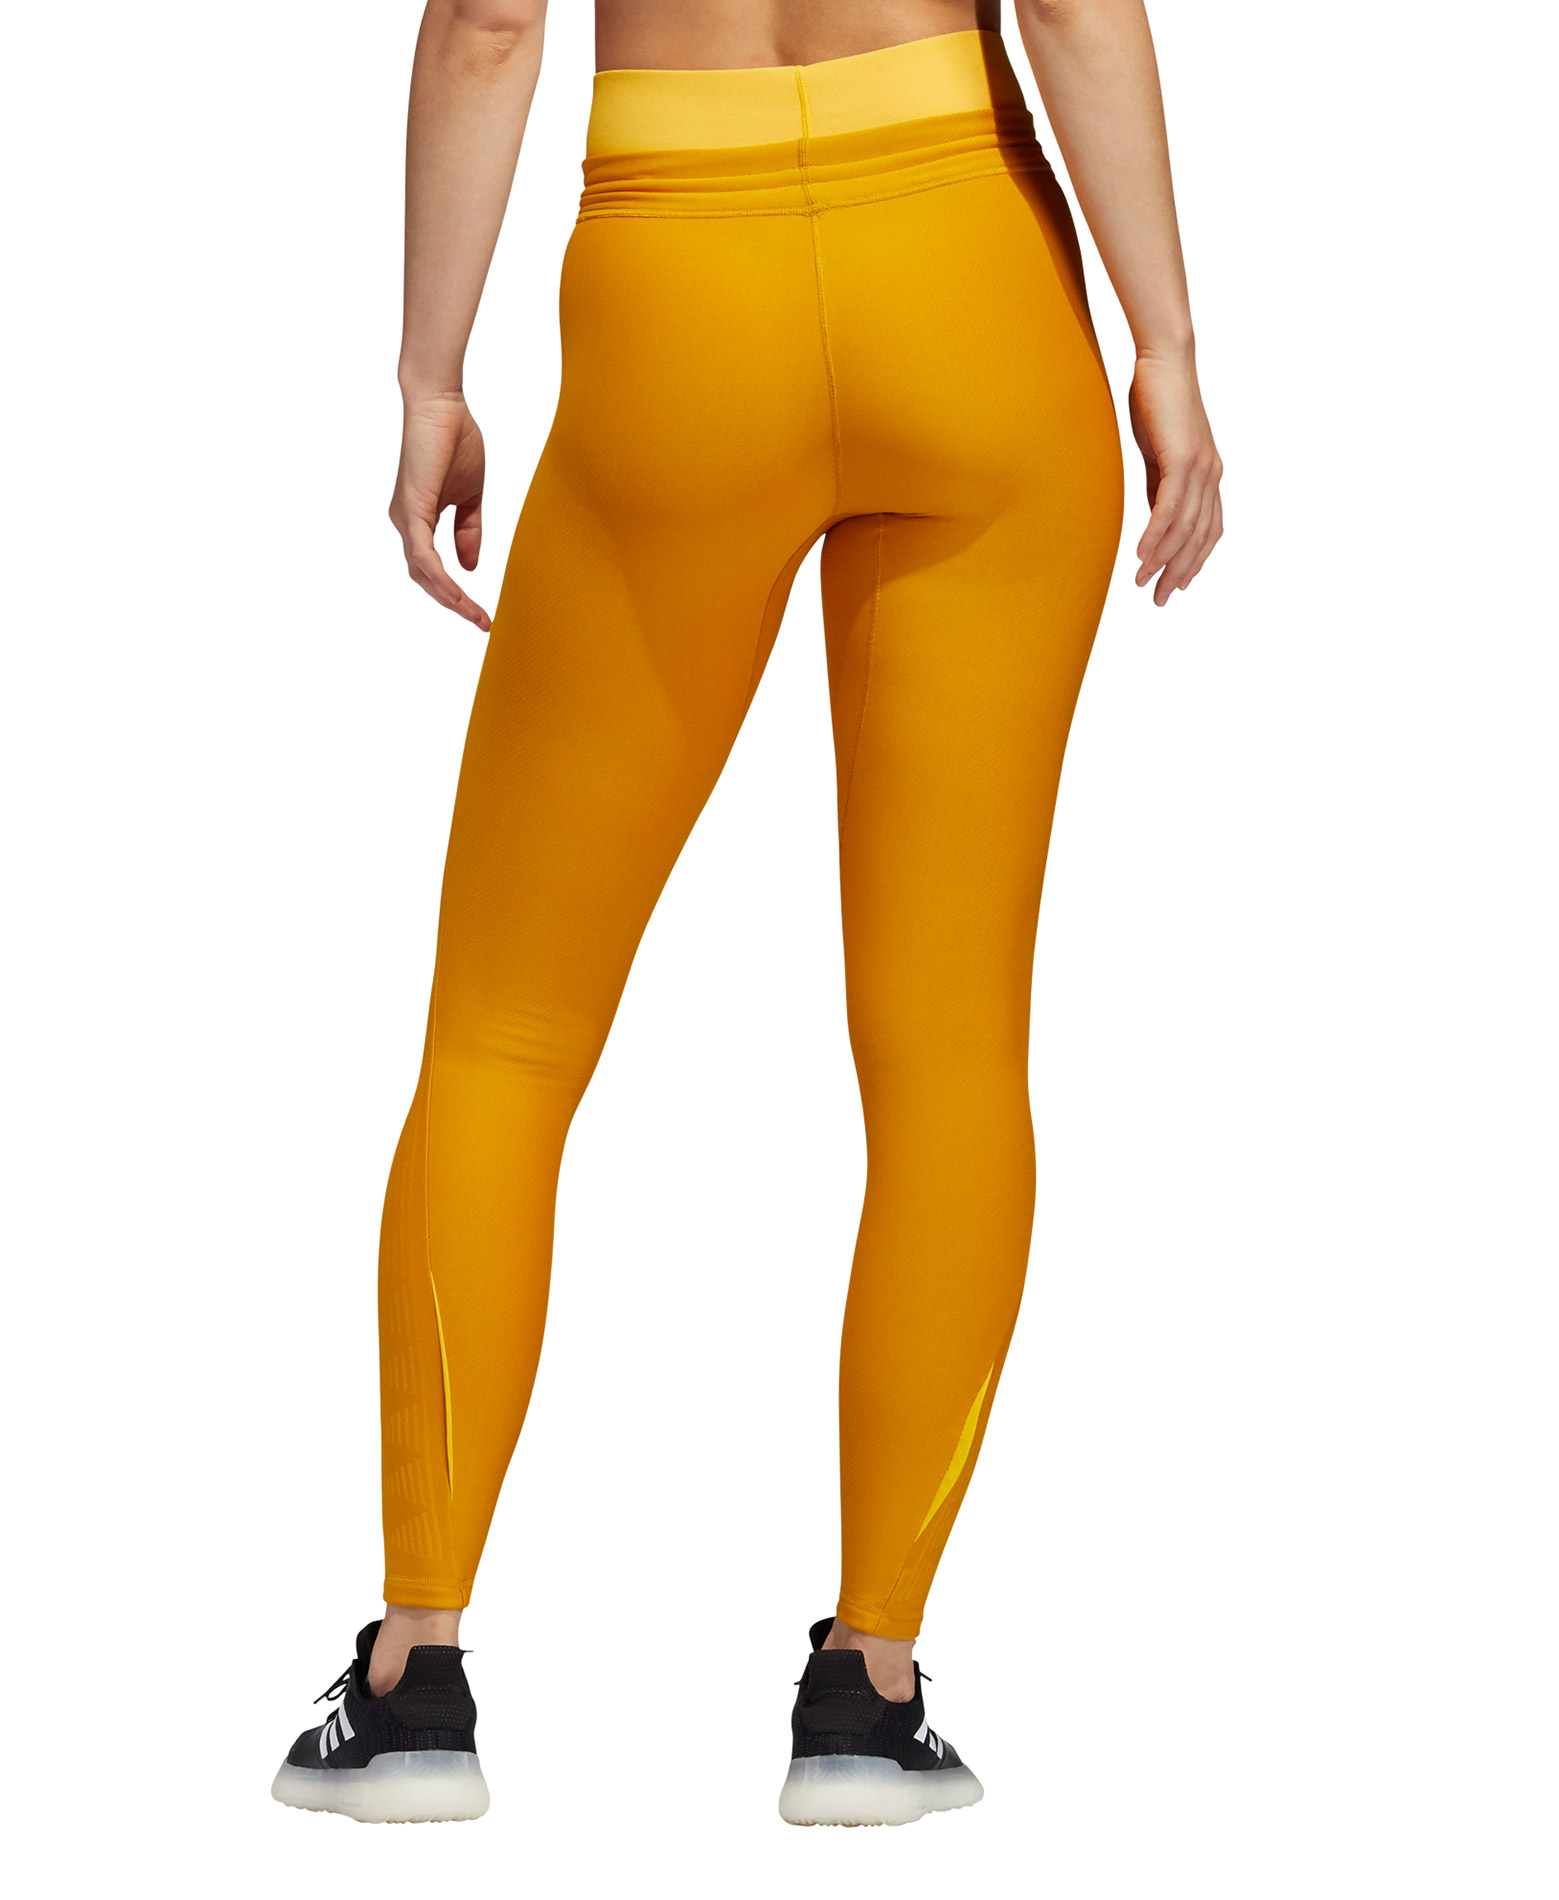 Discovery Yellow Textured Leggings – Discovery Activewear